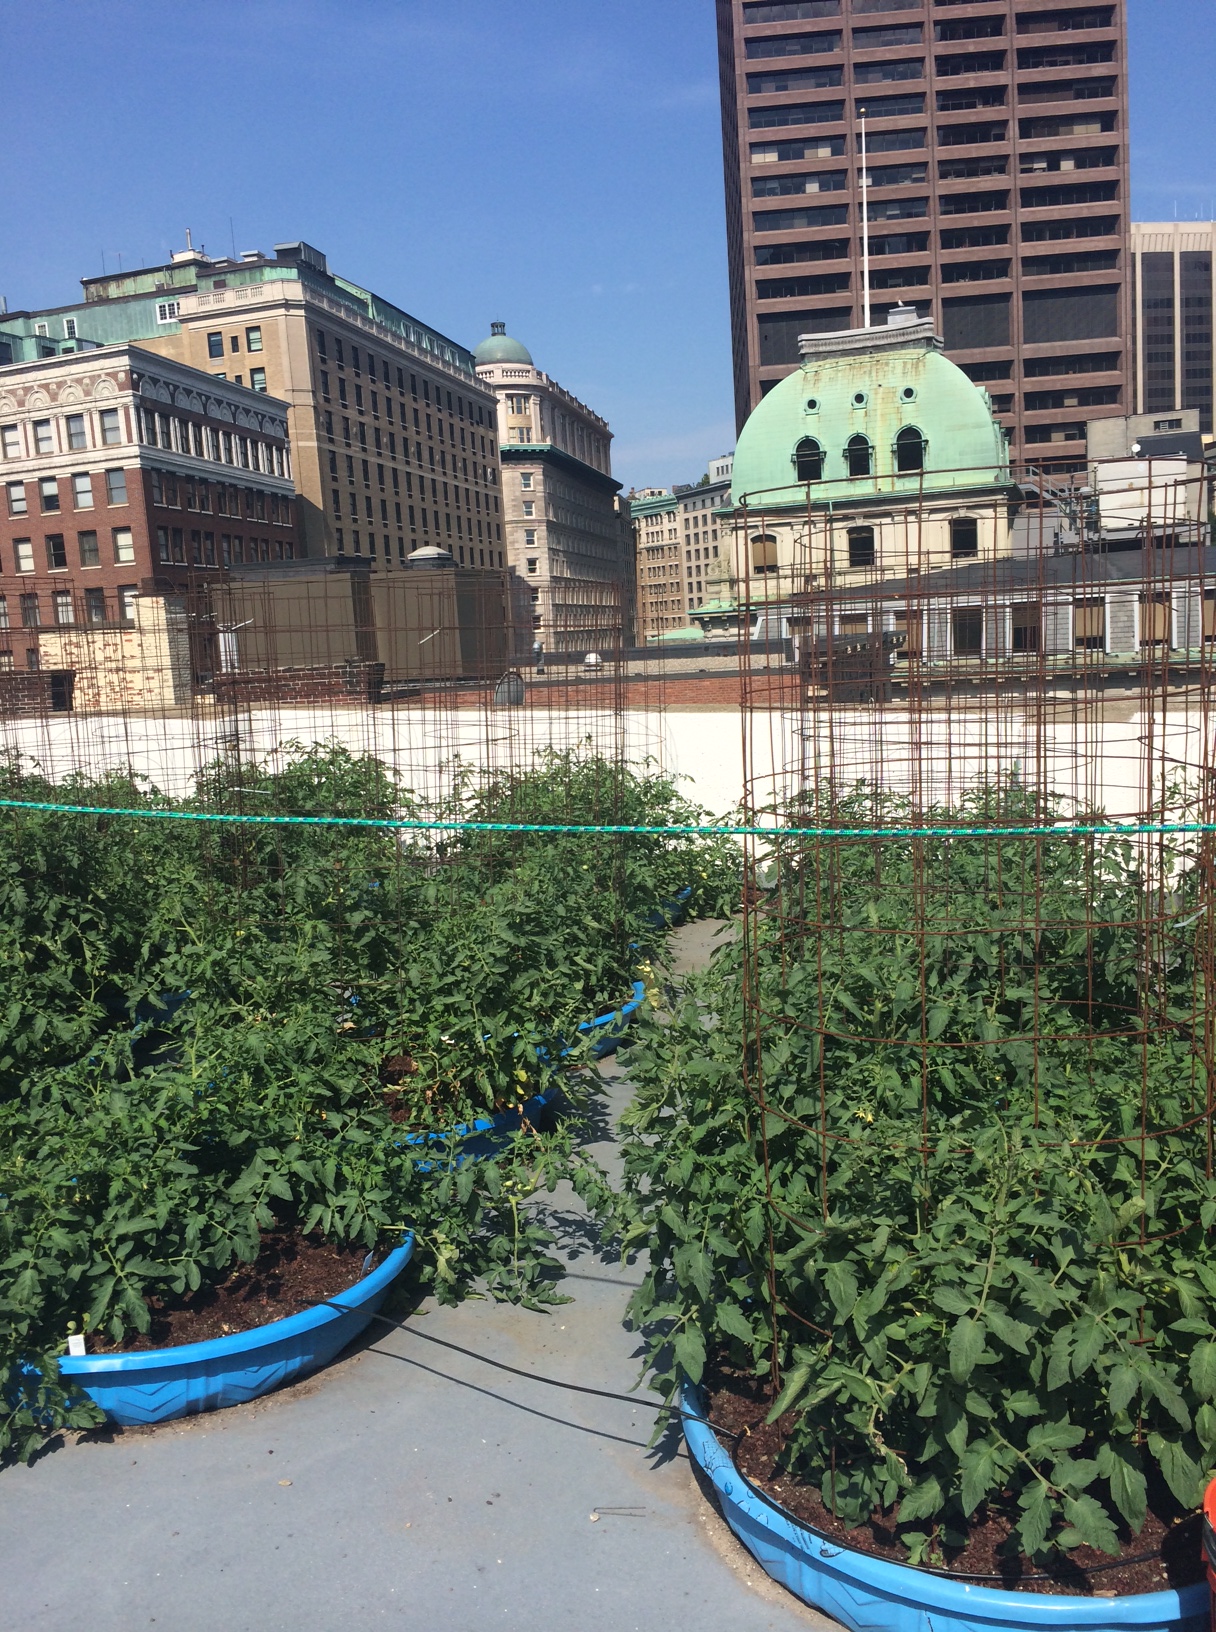 Rooftop Tomatoes at b.good restaurant in Boston, featured in a recent video I made for GCG.